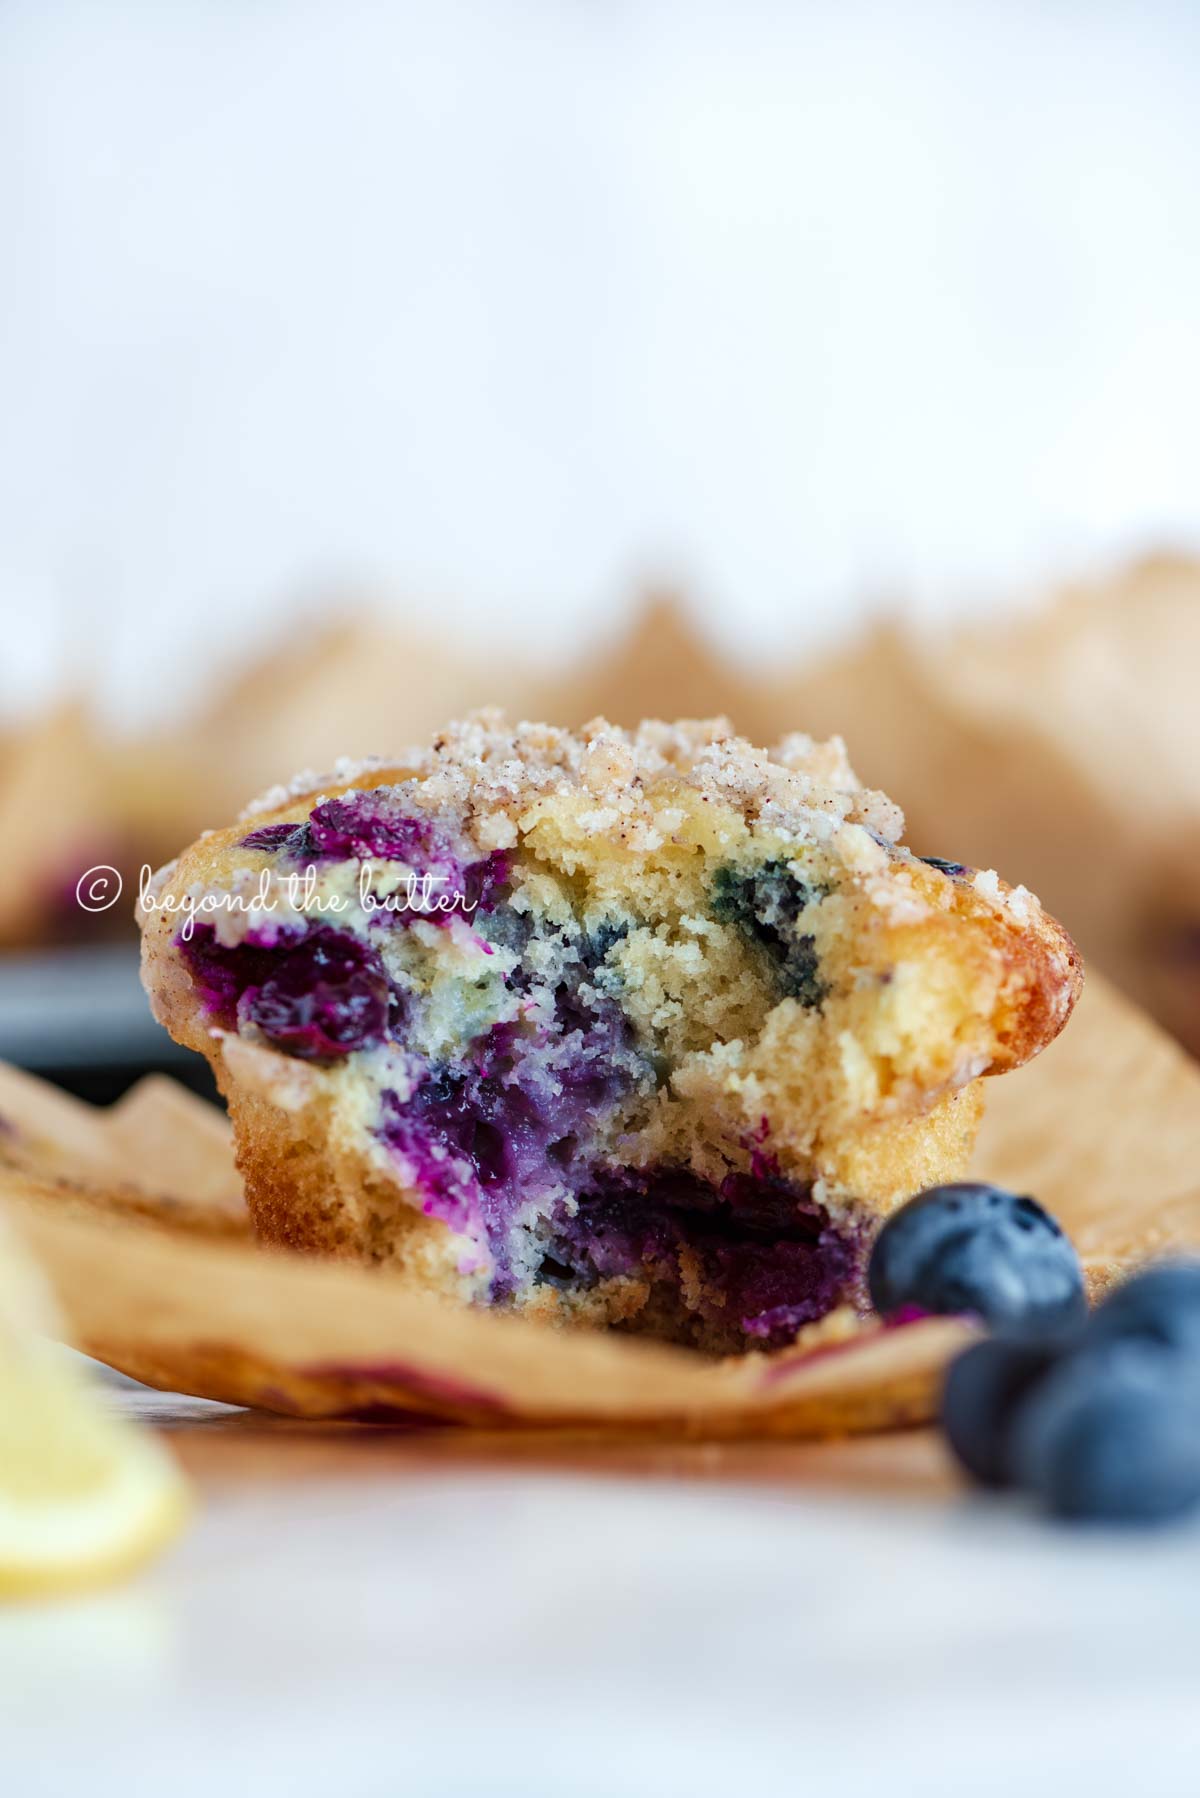 Unwrapped and half eaten lemon blueberry streusel muffin with lemon wedges and blueberries around it | All images © Beyond the Butter®